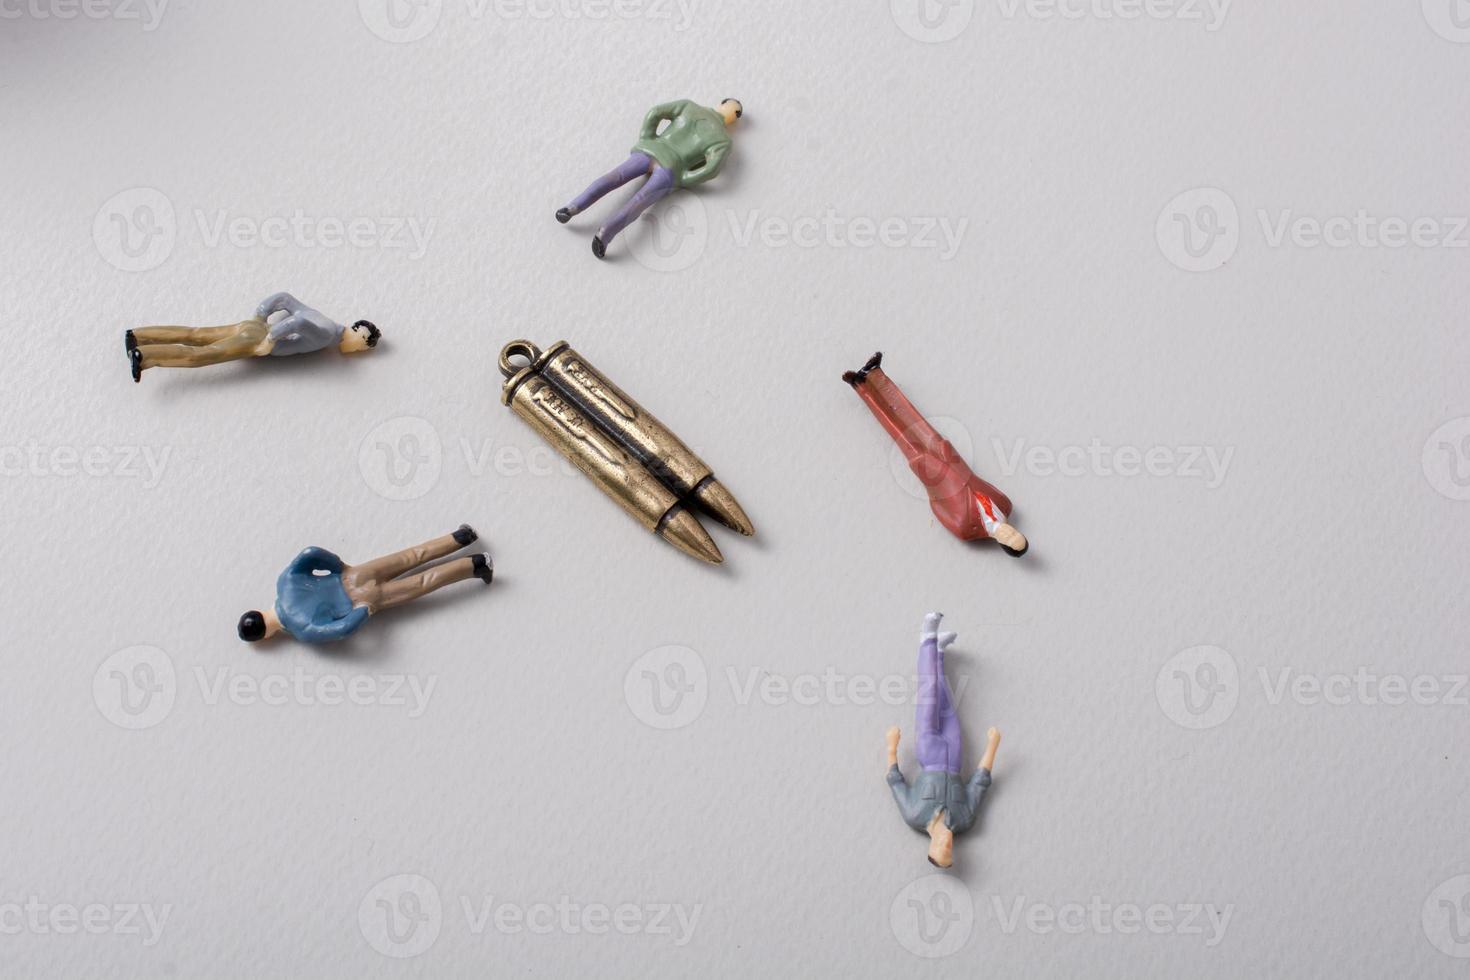 Men figurine around Bullet as Conceptual against the war photo